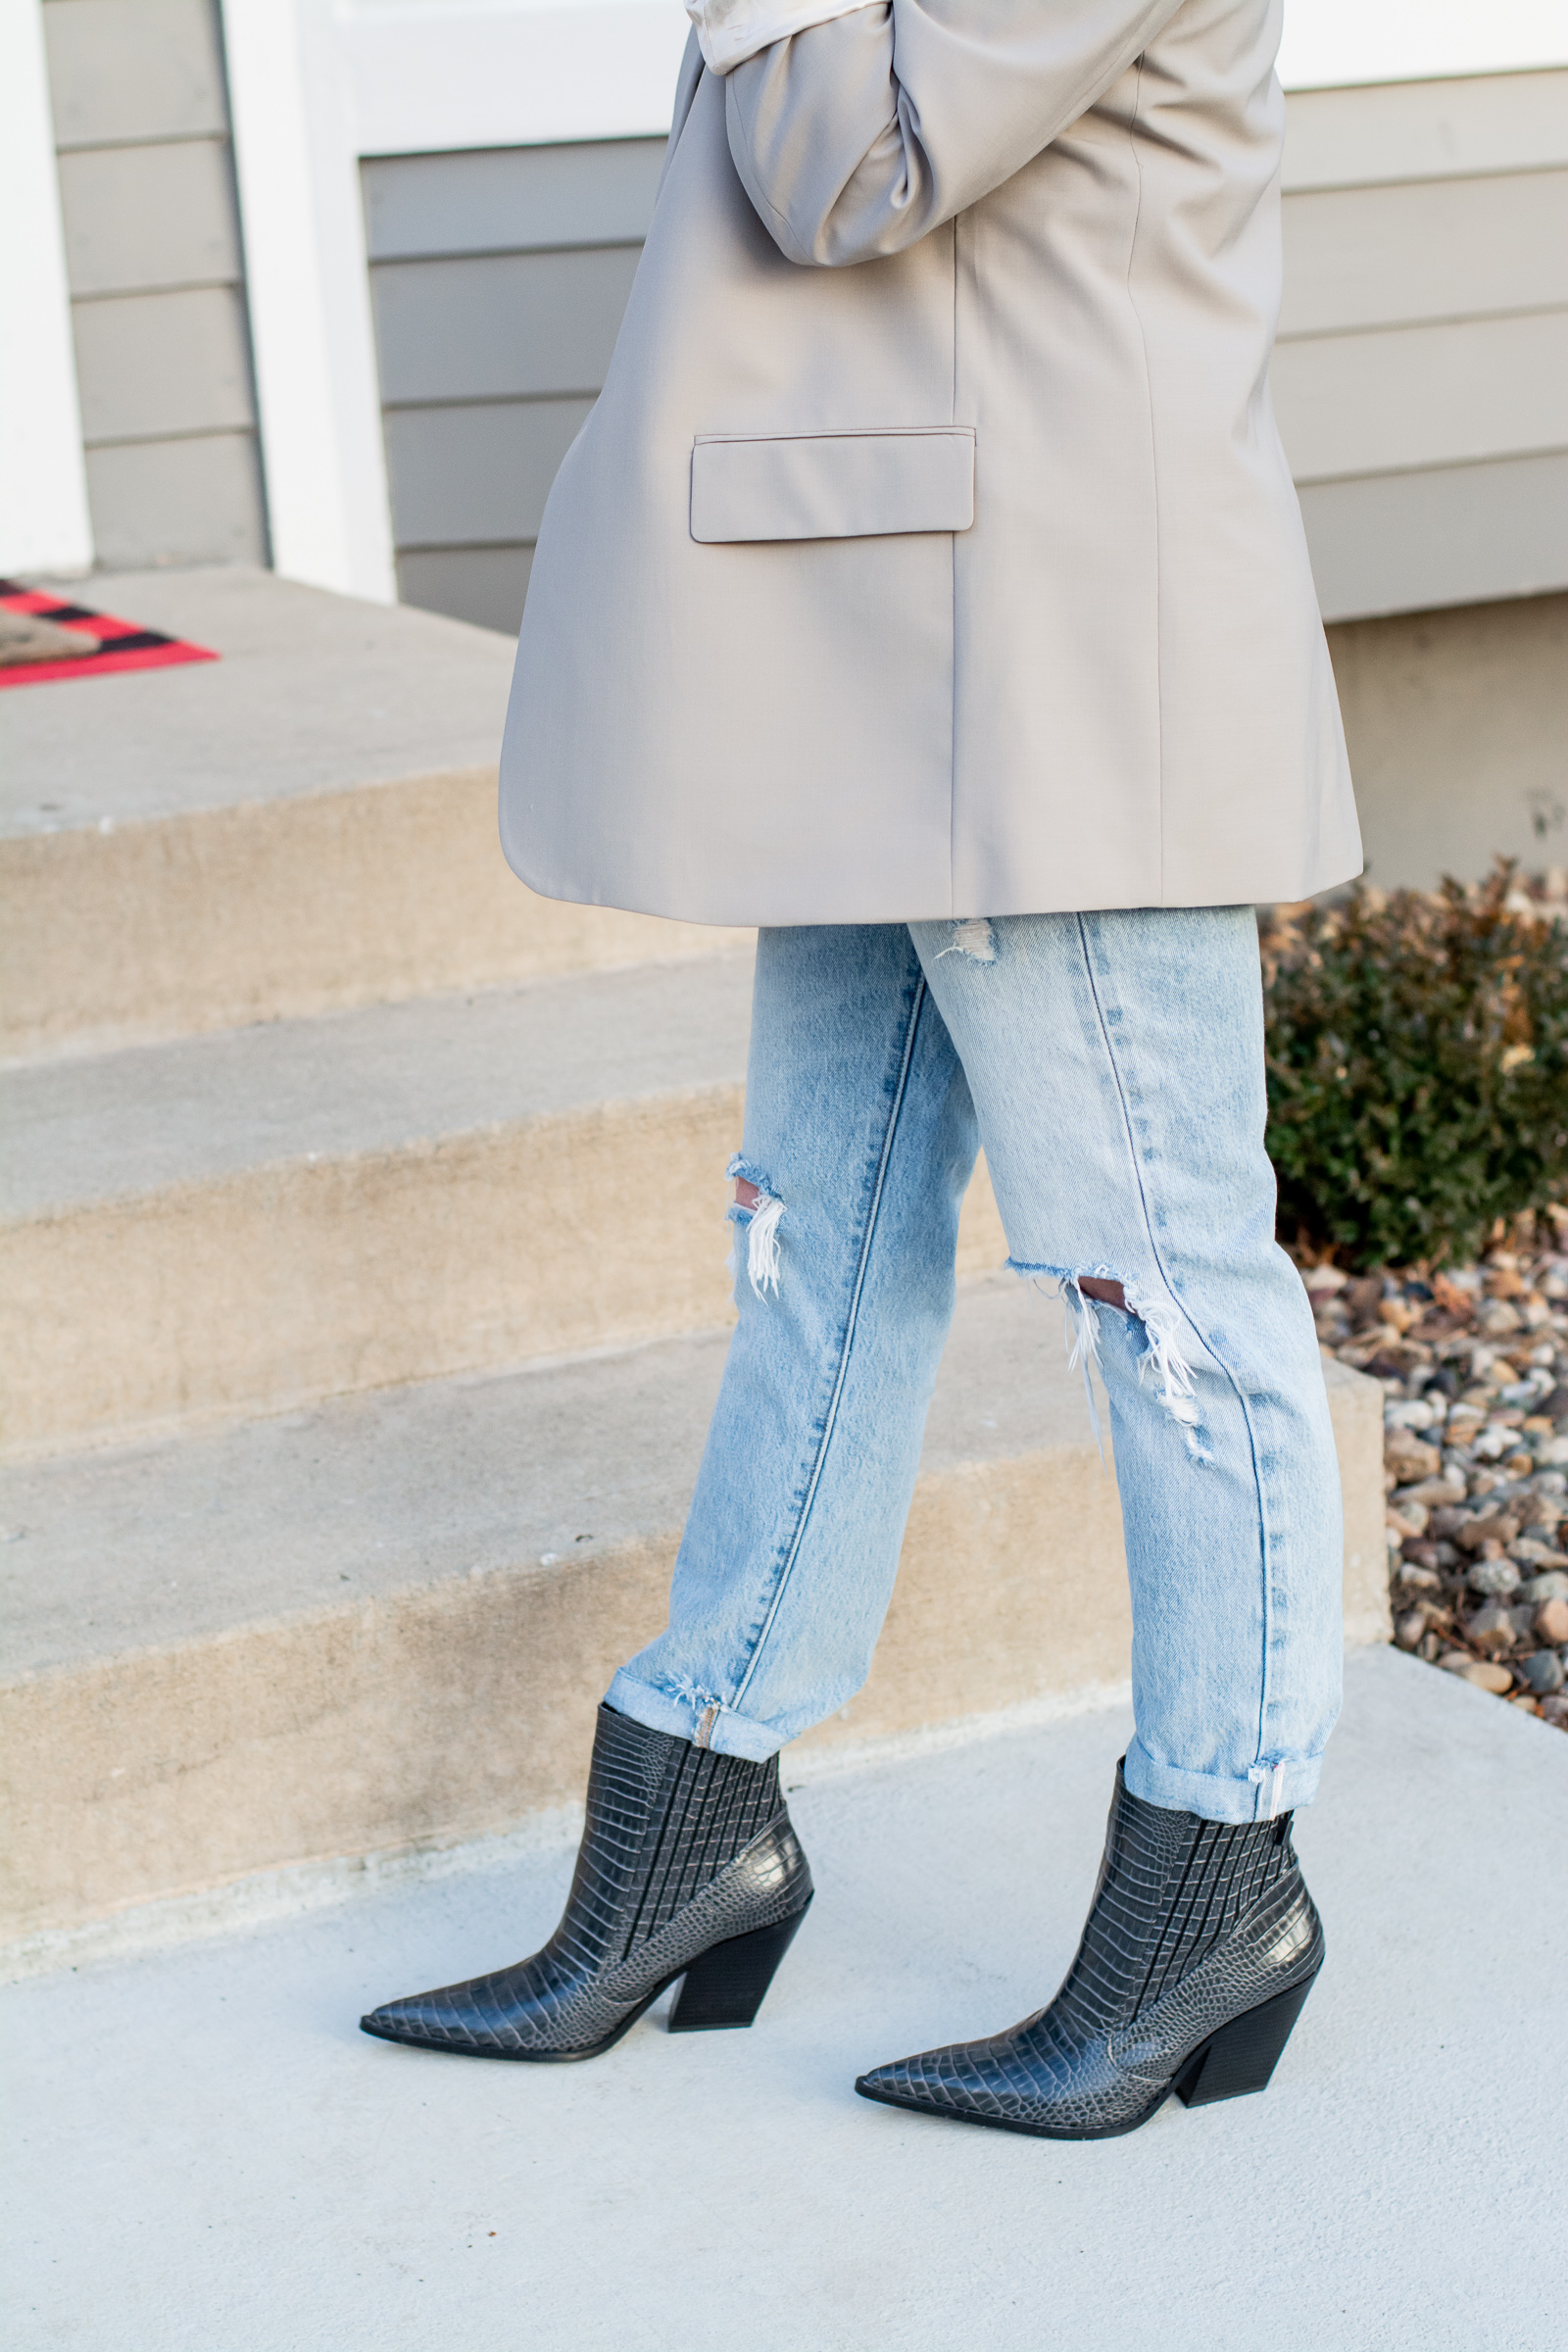 Oversized 80s Blazer and Gray Ankle Boots. | LSR